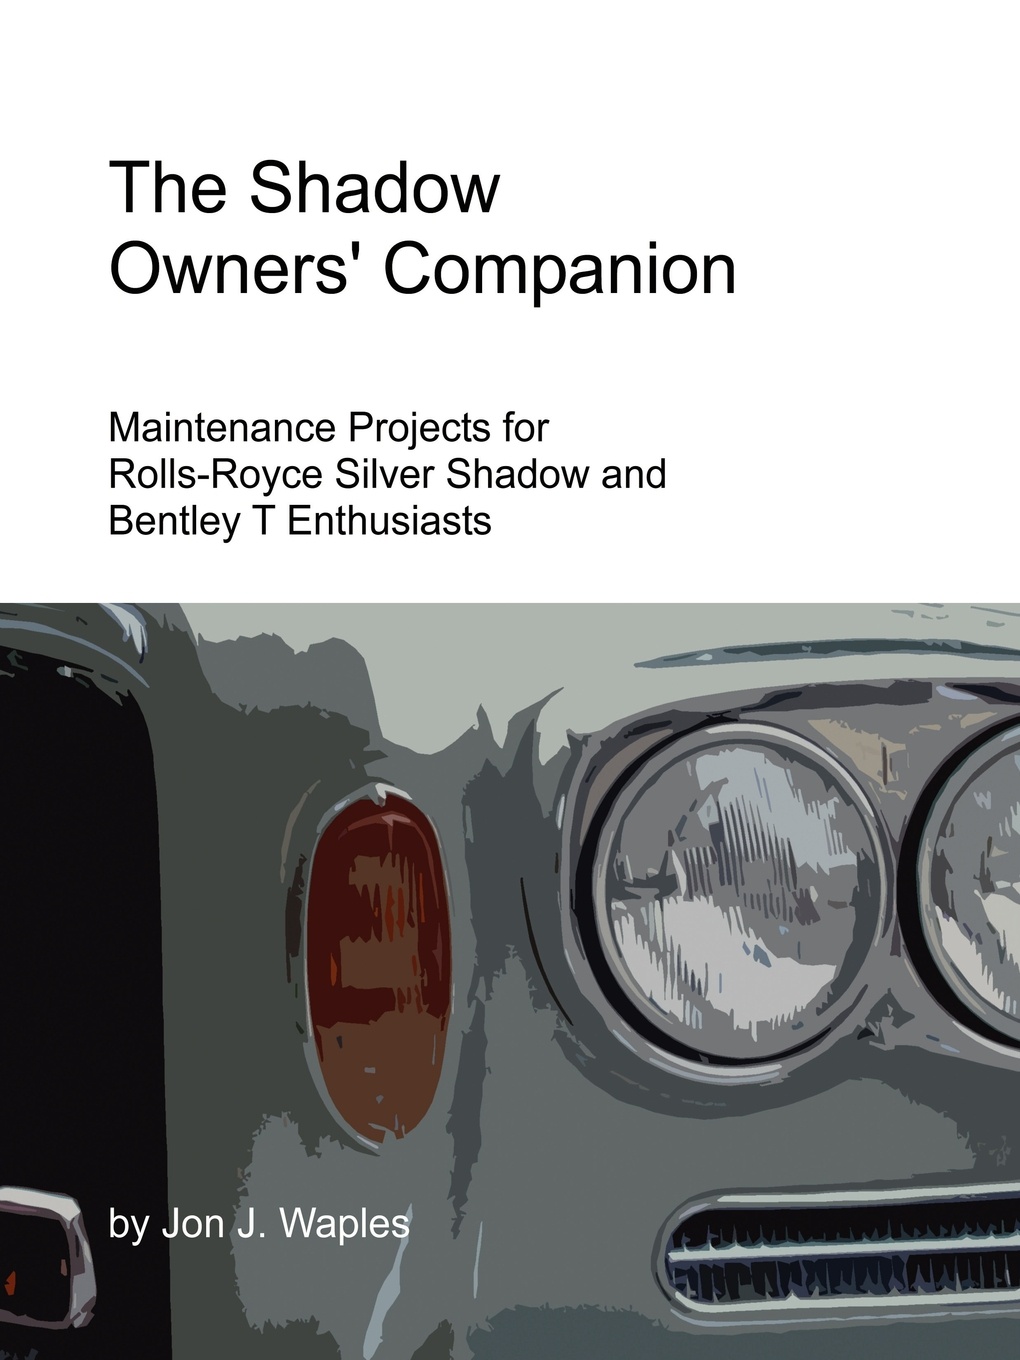 The Shadow Owners` Companion. Maintenance Projects for Rolls-Royce Silver Shadow and Bentley T Enthusiasts